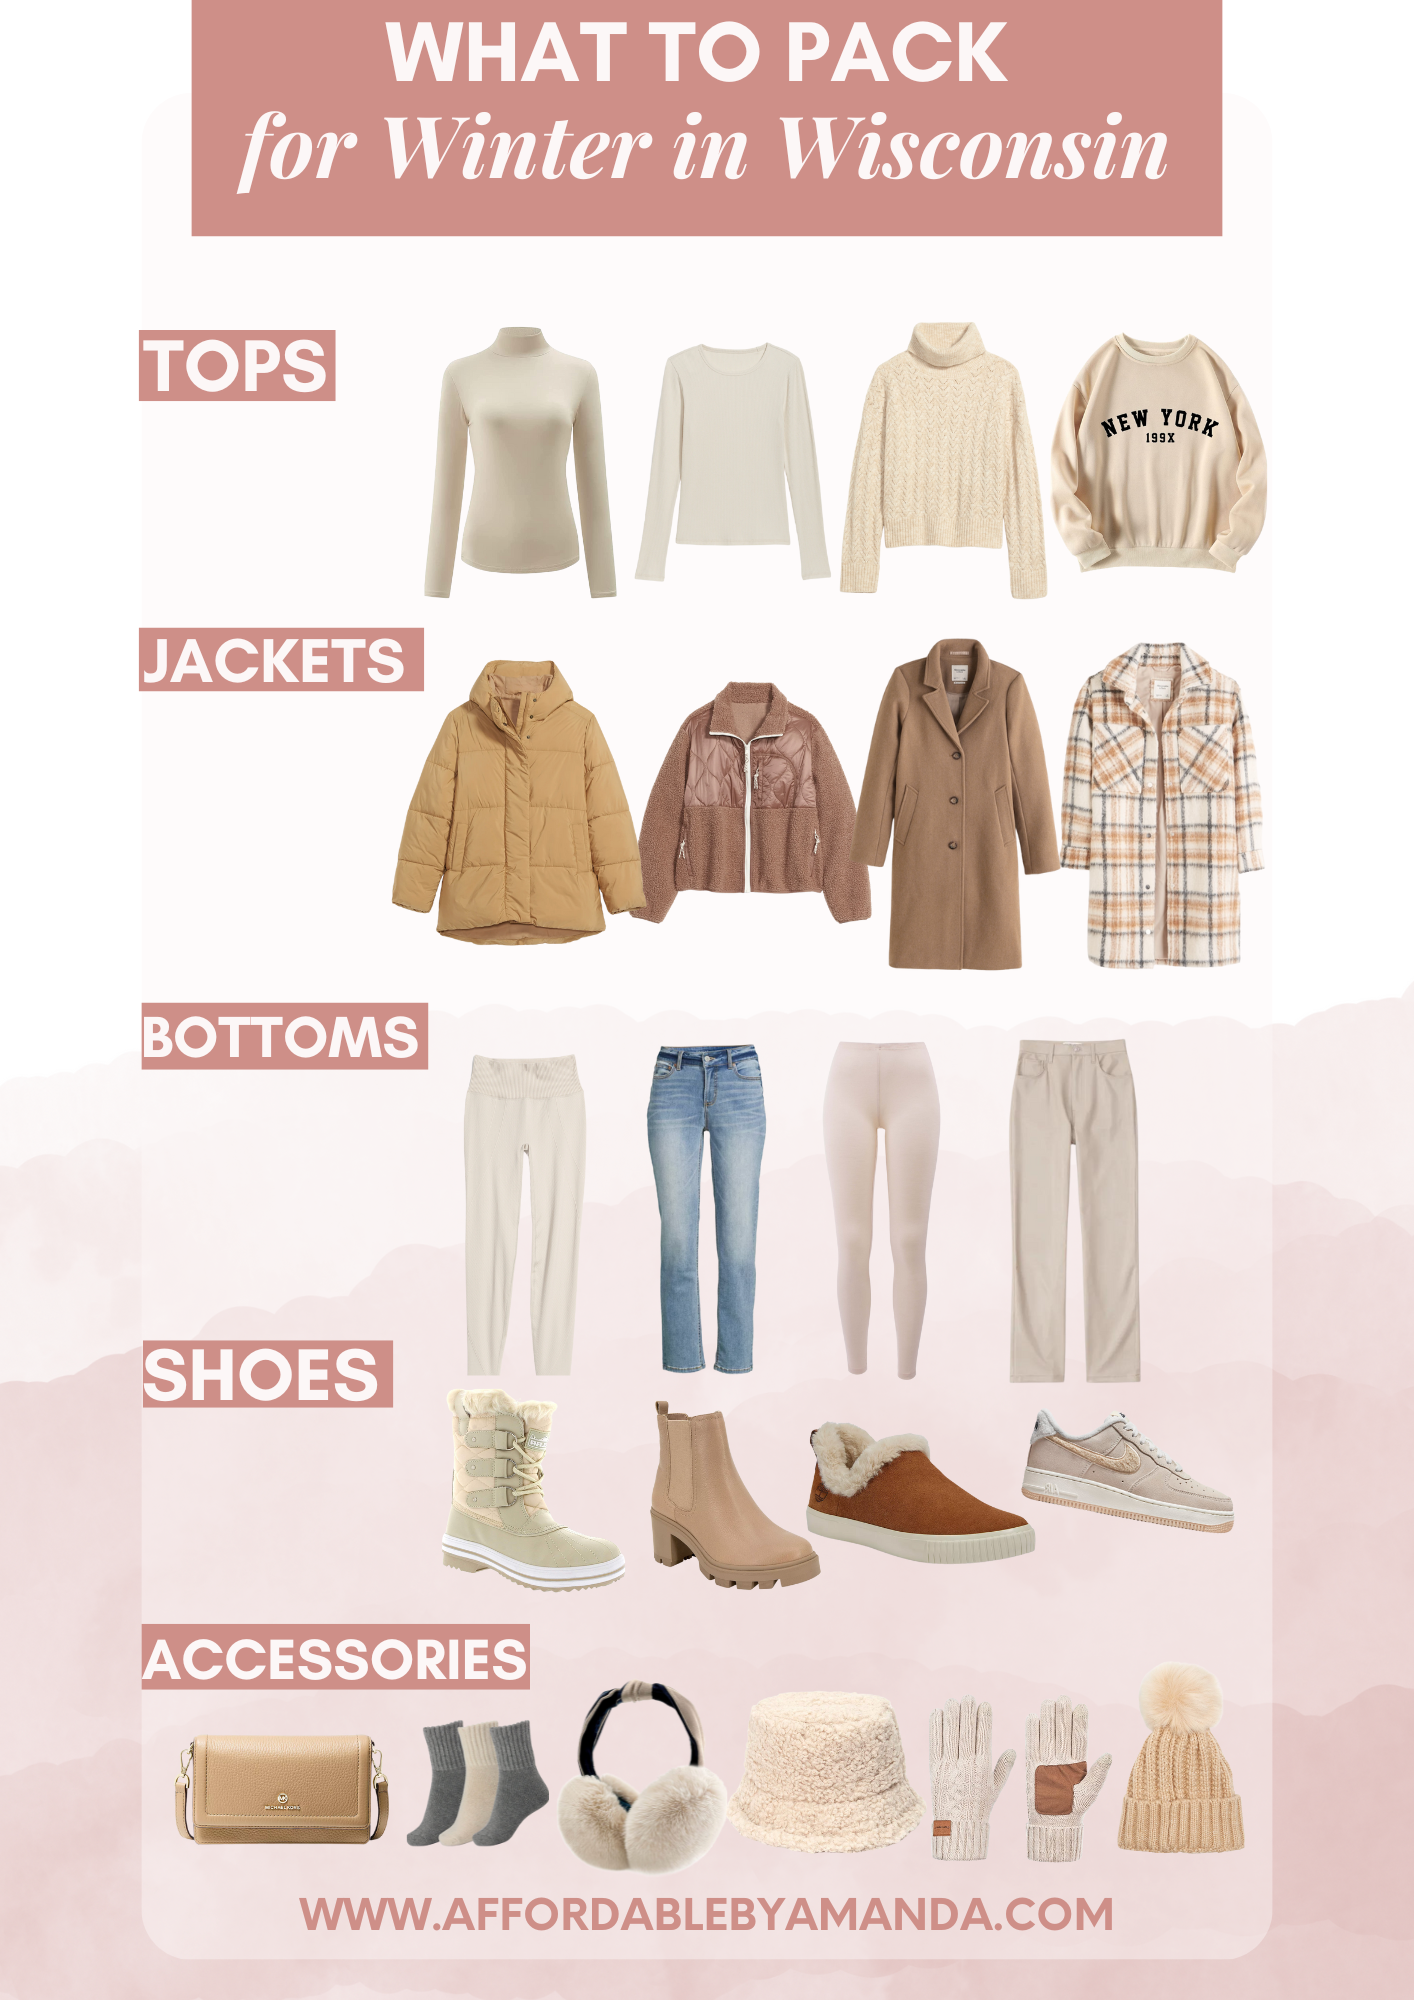 How to Dress for Wisconsin - What to Wear in Madison, Wisconsin - What To Pack for Winter in Wisconsin - What To Wear in Midwest USA